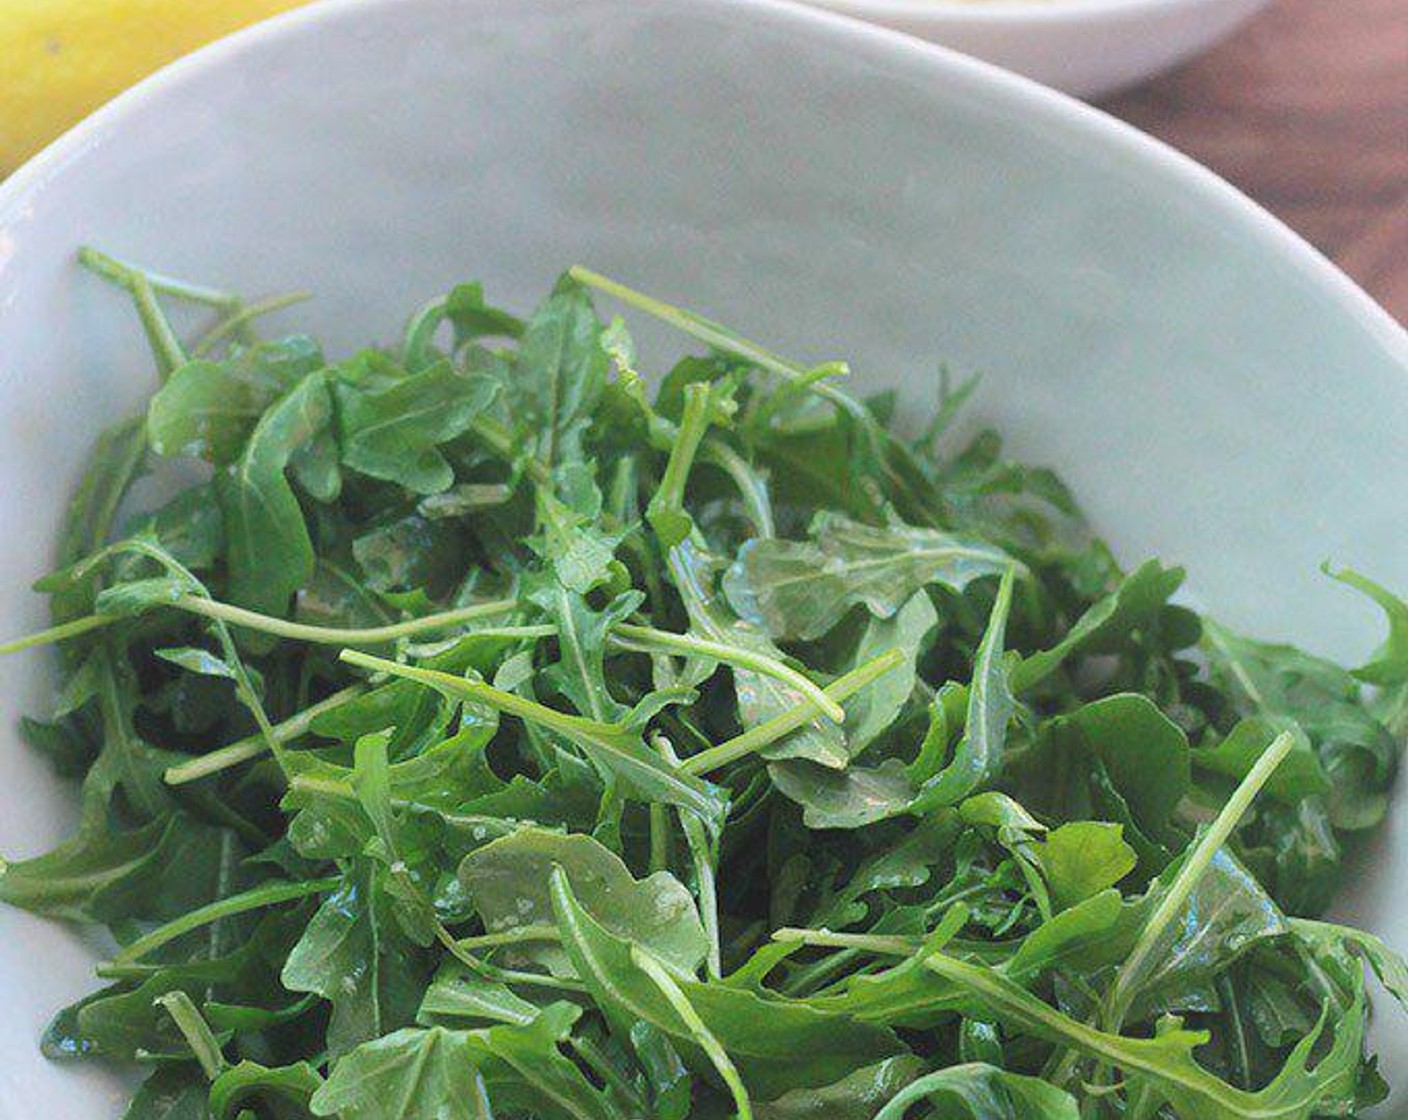 step 4 While pizza is in the oven, place Arugula (4 cups) in a large bowl, drizzle with Extra-Virgin Olive Oil (1 Tbsp) and juice from Lemon (1/2). Season with Salt (to taste) and Ground Black Pepper (to taste).